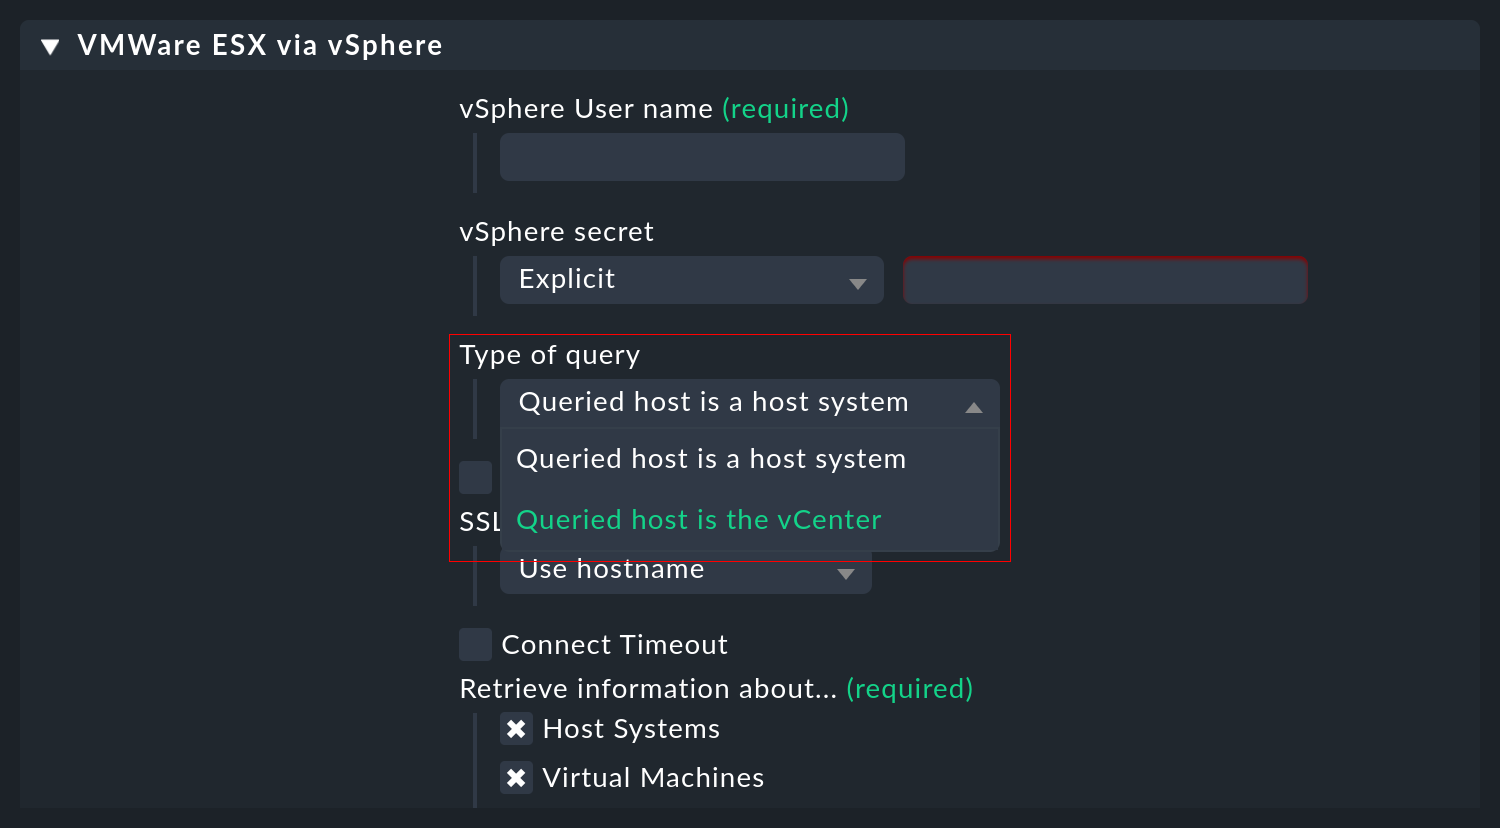 Choices 'host system' vs. 'vCenter' in VMware ESXi configuration.